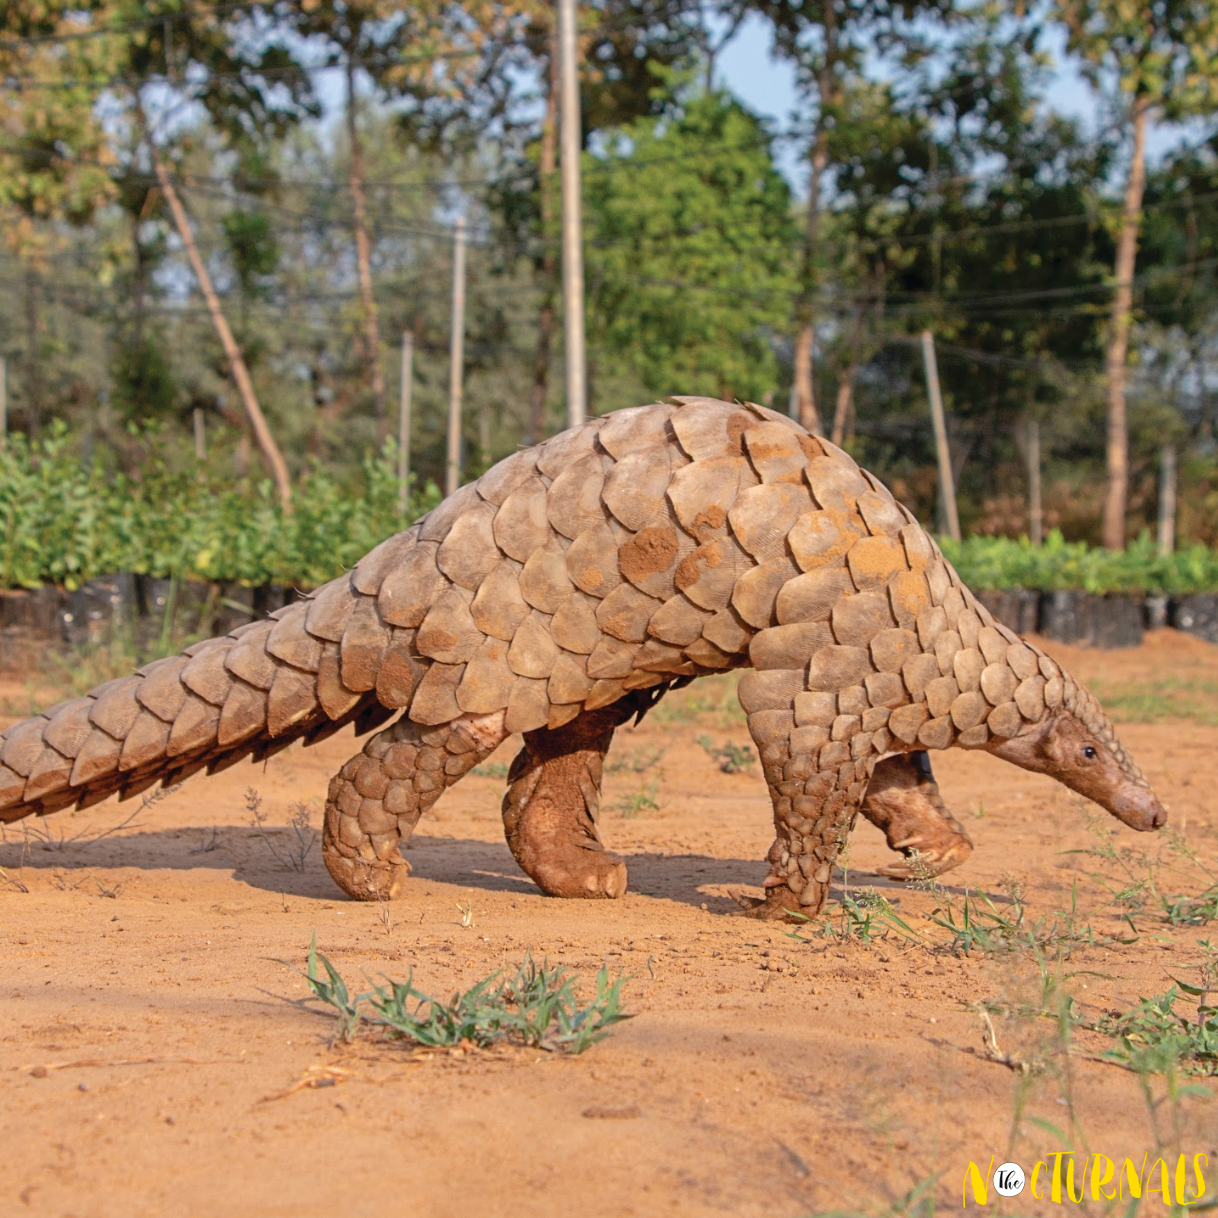 A pangolin walks to the right.